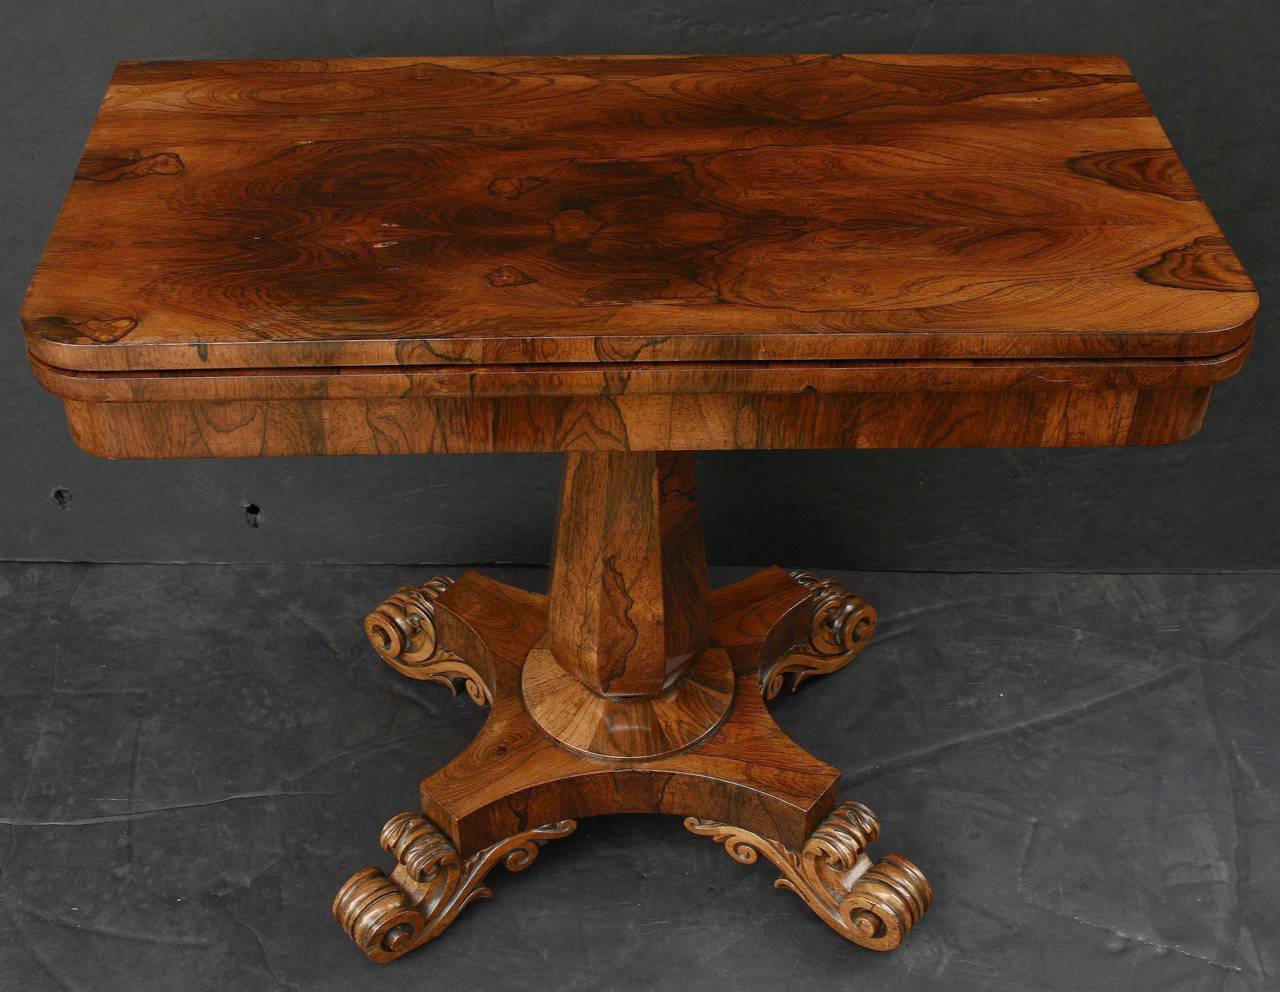 A handsome English game or card table (or tea table) of rosewood, featuring a fold-over, sliding top of figured rosewood, rotating and opening to a square felt-covered top for entertaining. Set upon a faceted column post and four-legged base with